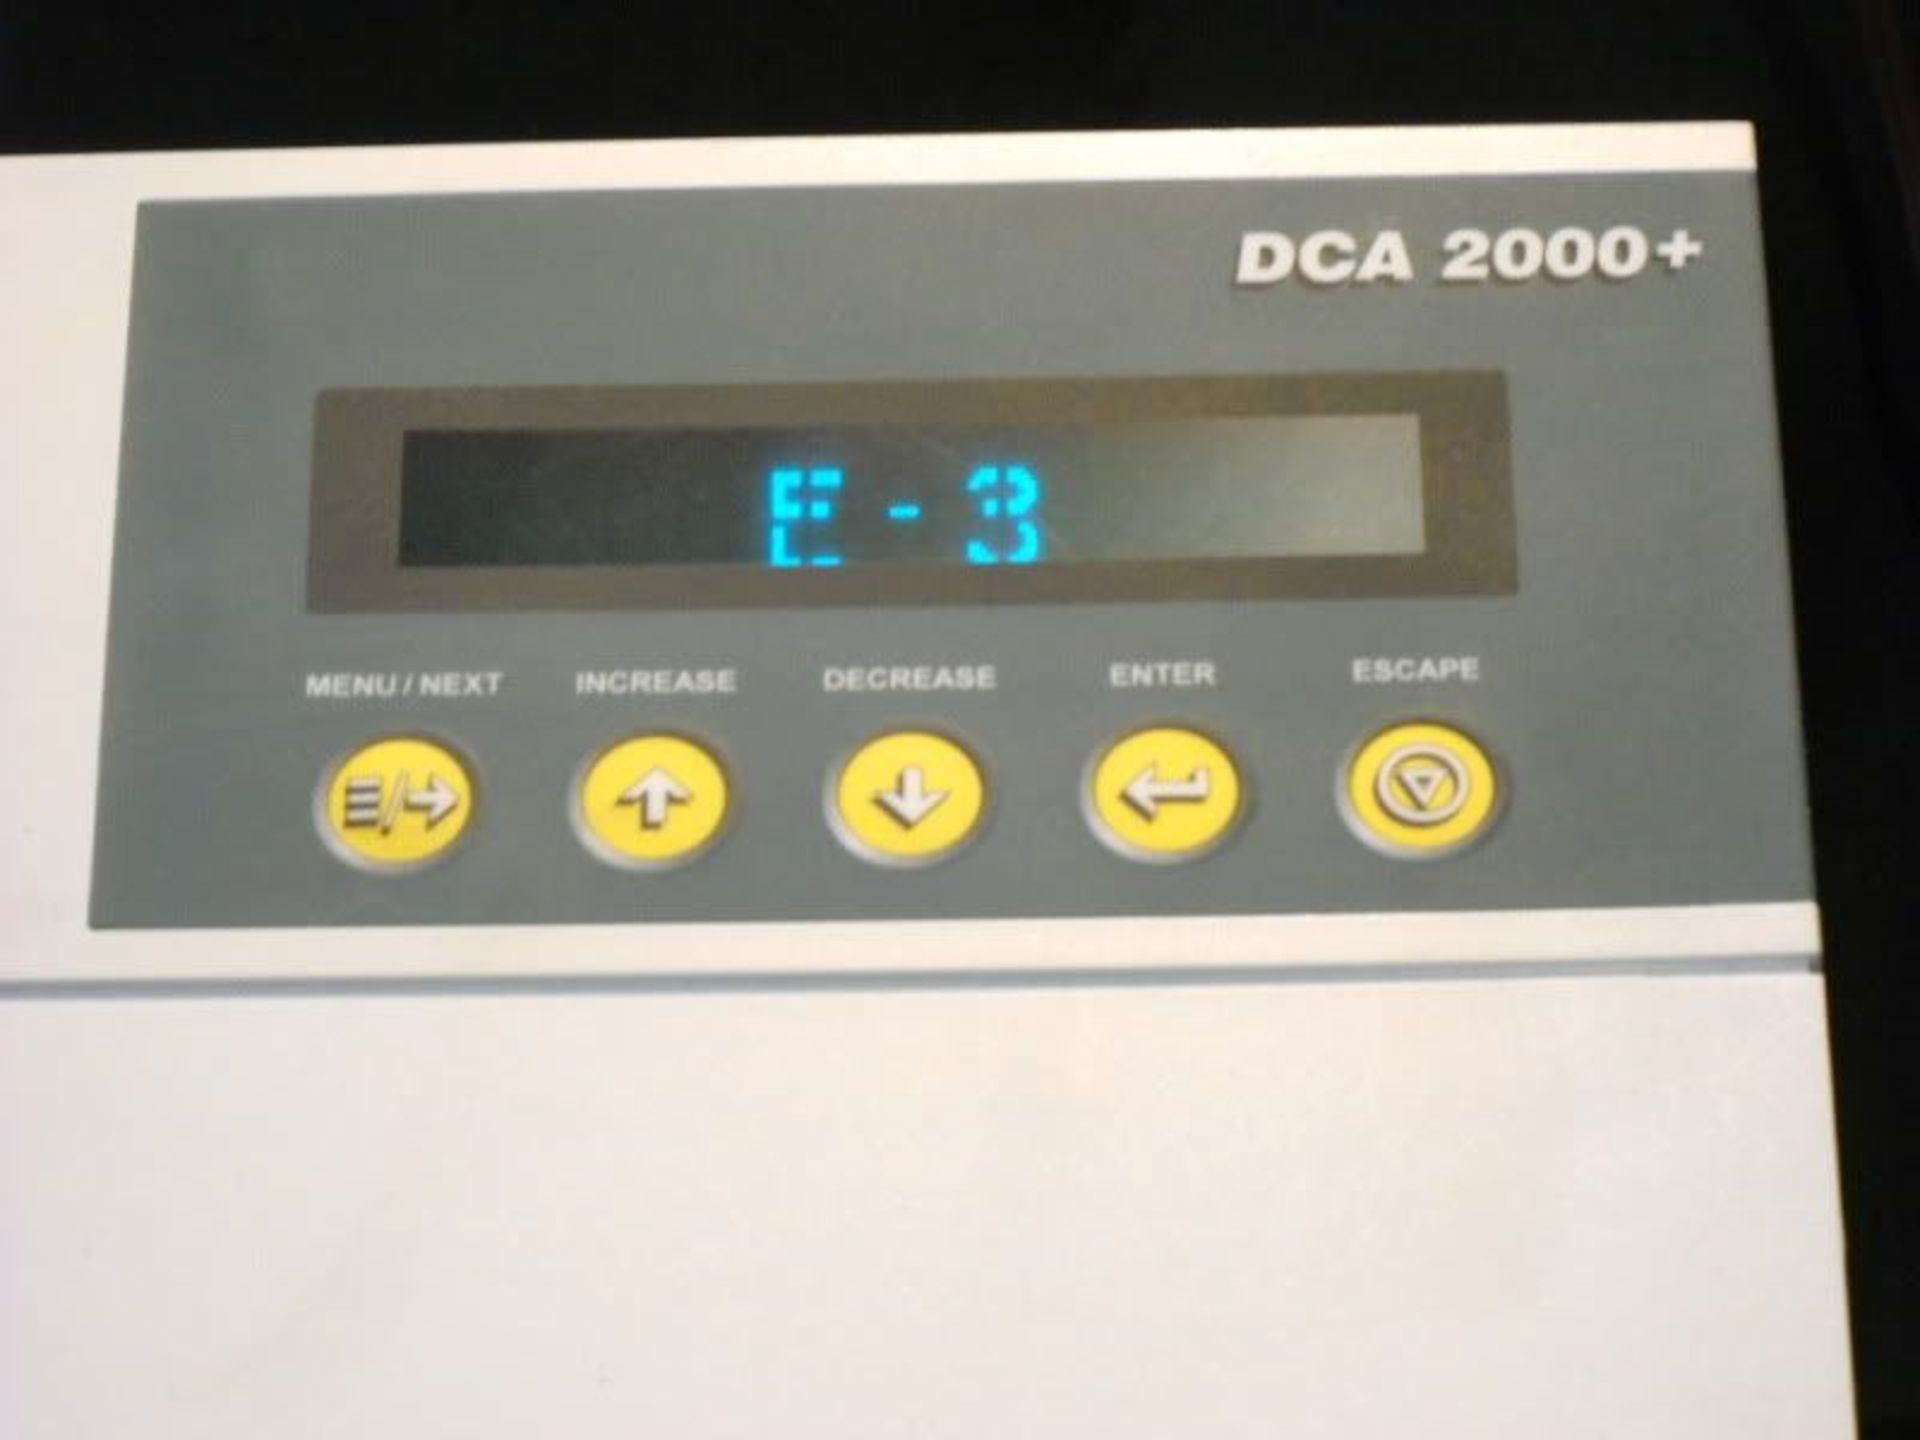 Bayer DCA 2000+ Analyzer (Parts), Qty 1, 220988261954 - Image 2 of 5